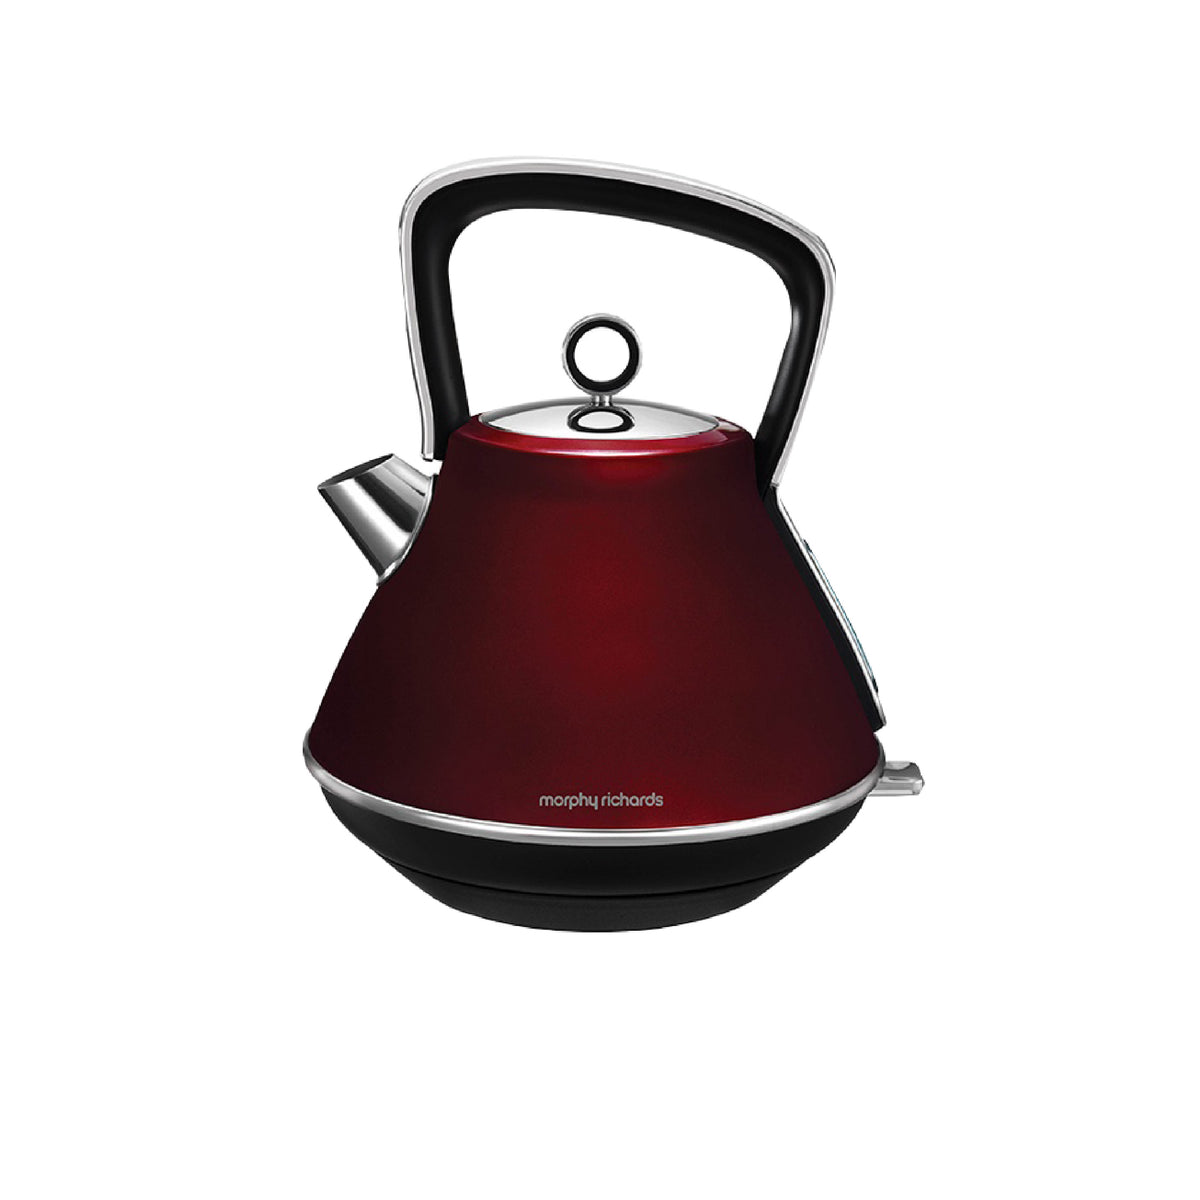 Review: Morphy Richards' Accents One Cup